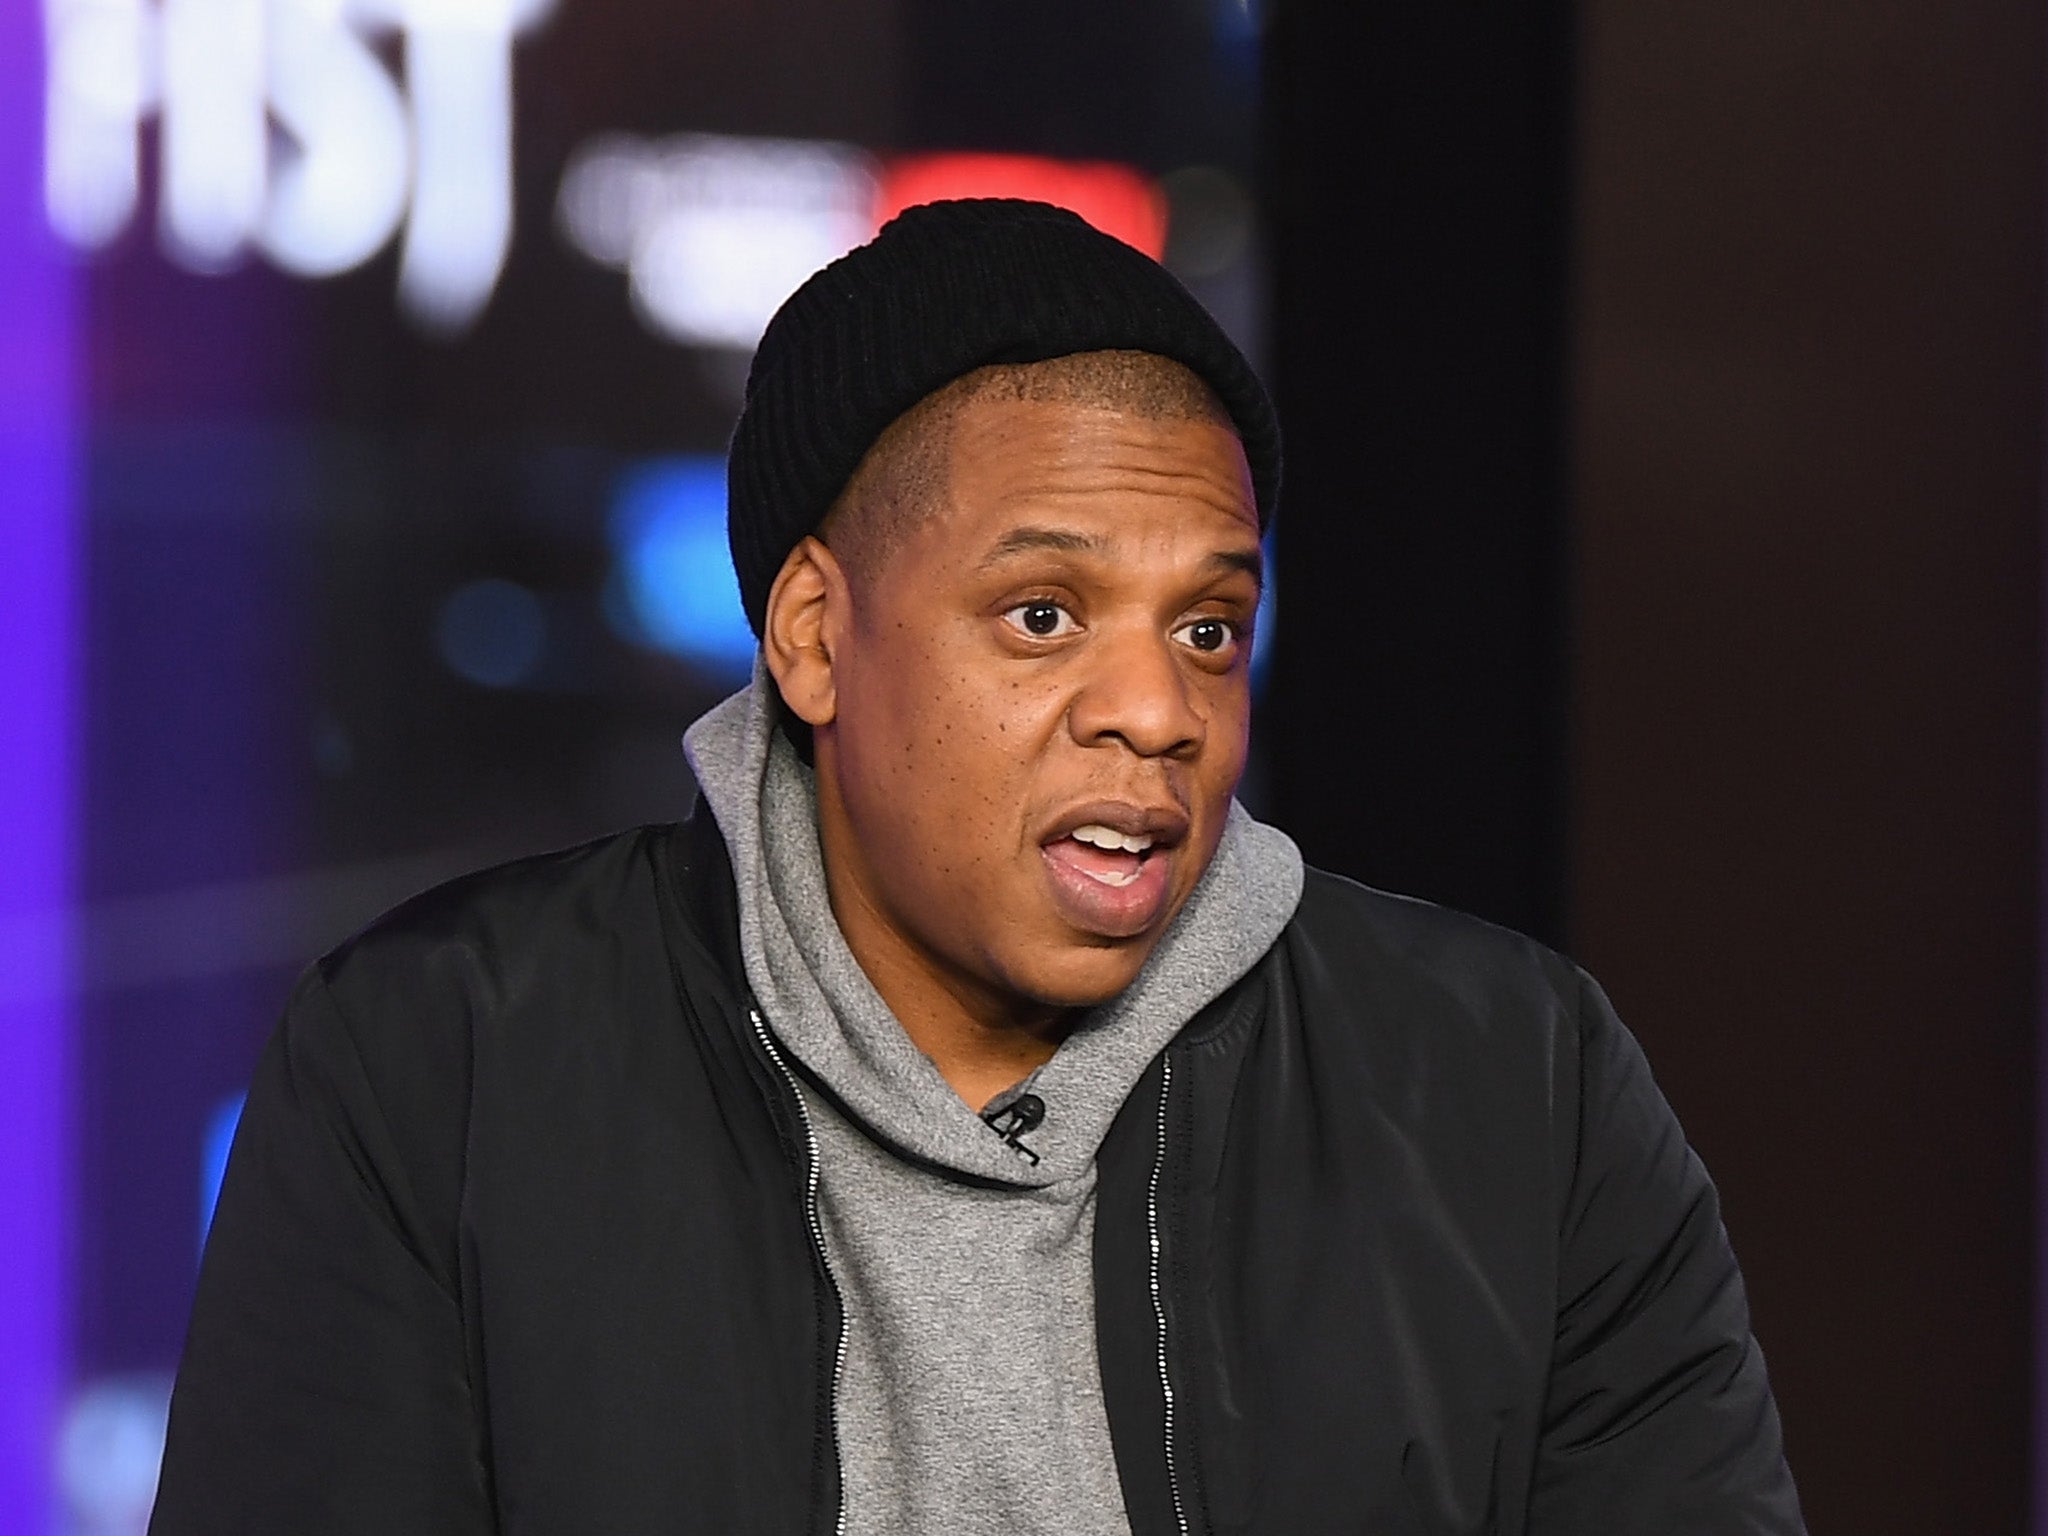 How the confessions are pouring out on JayZ's new album '444' The